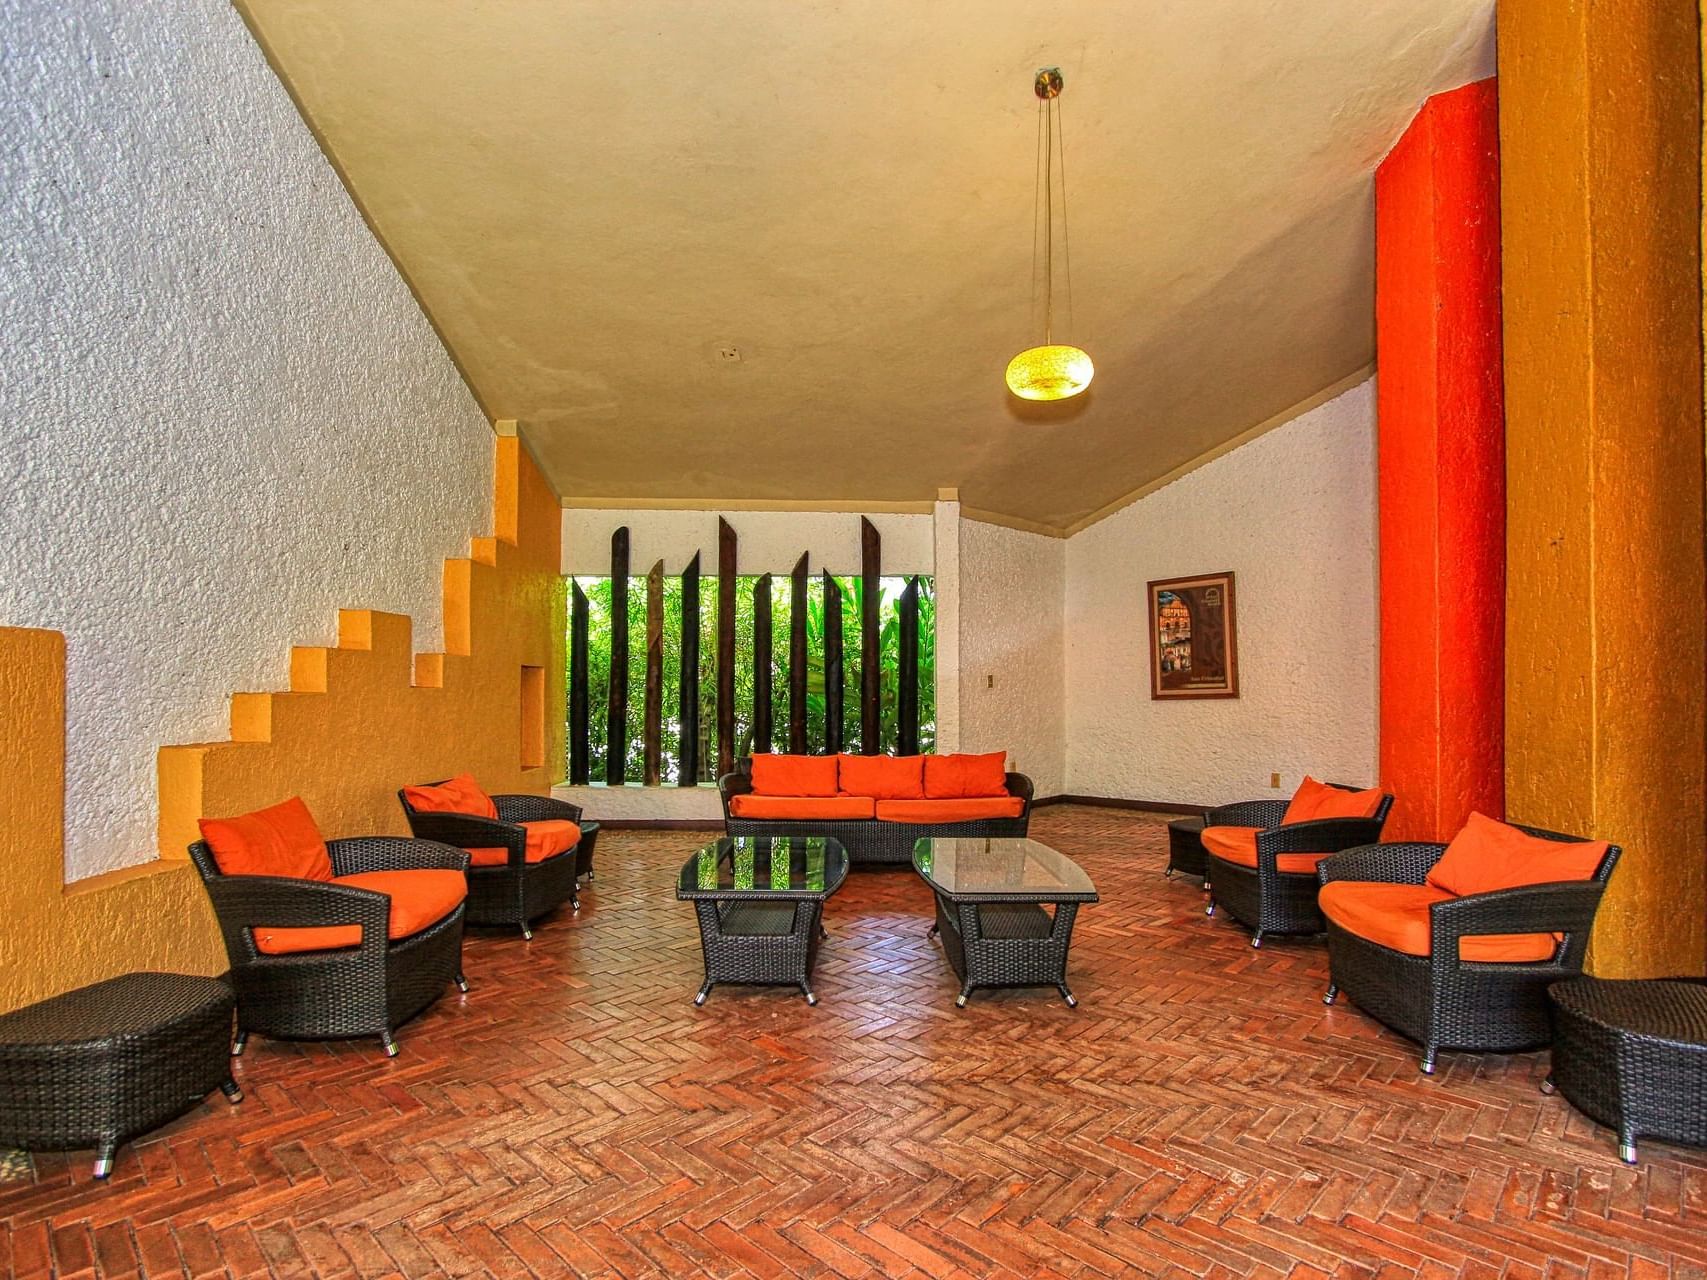 Lounge area in the hotel lobby at Ciudad Real Palenque